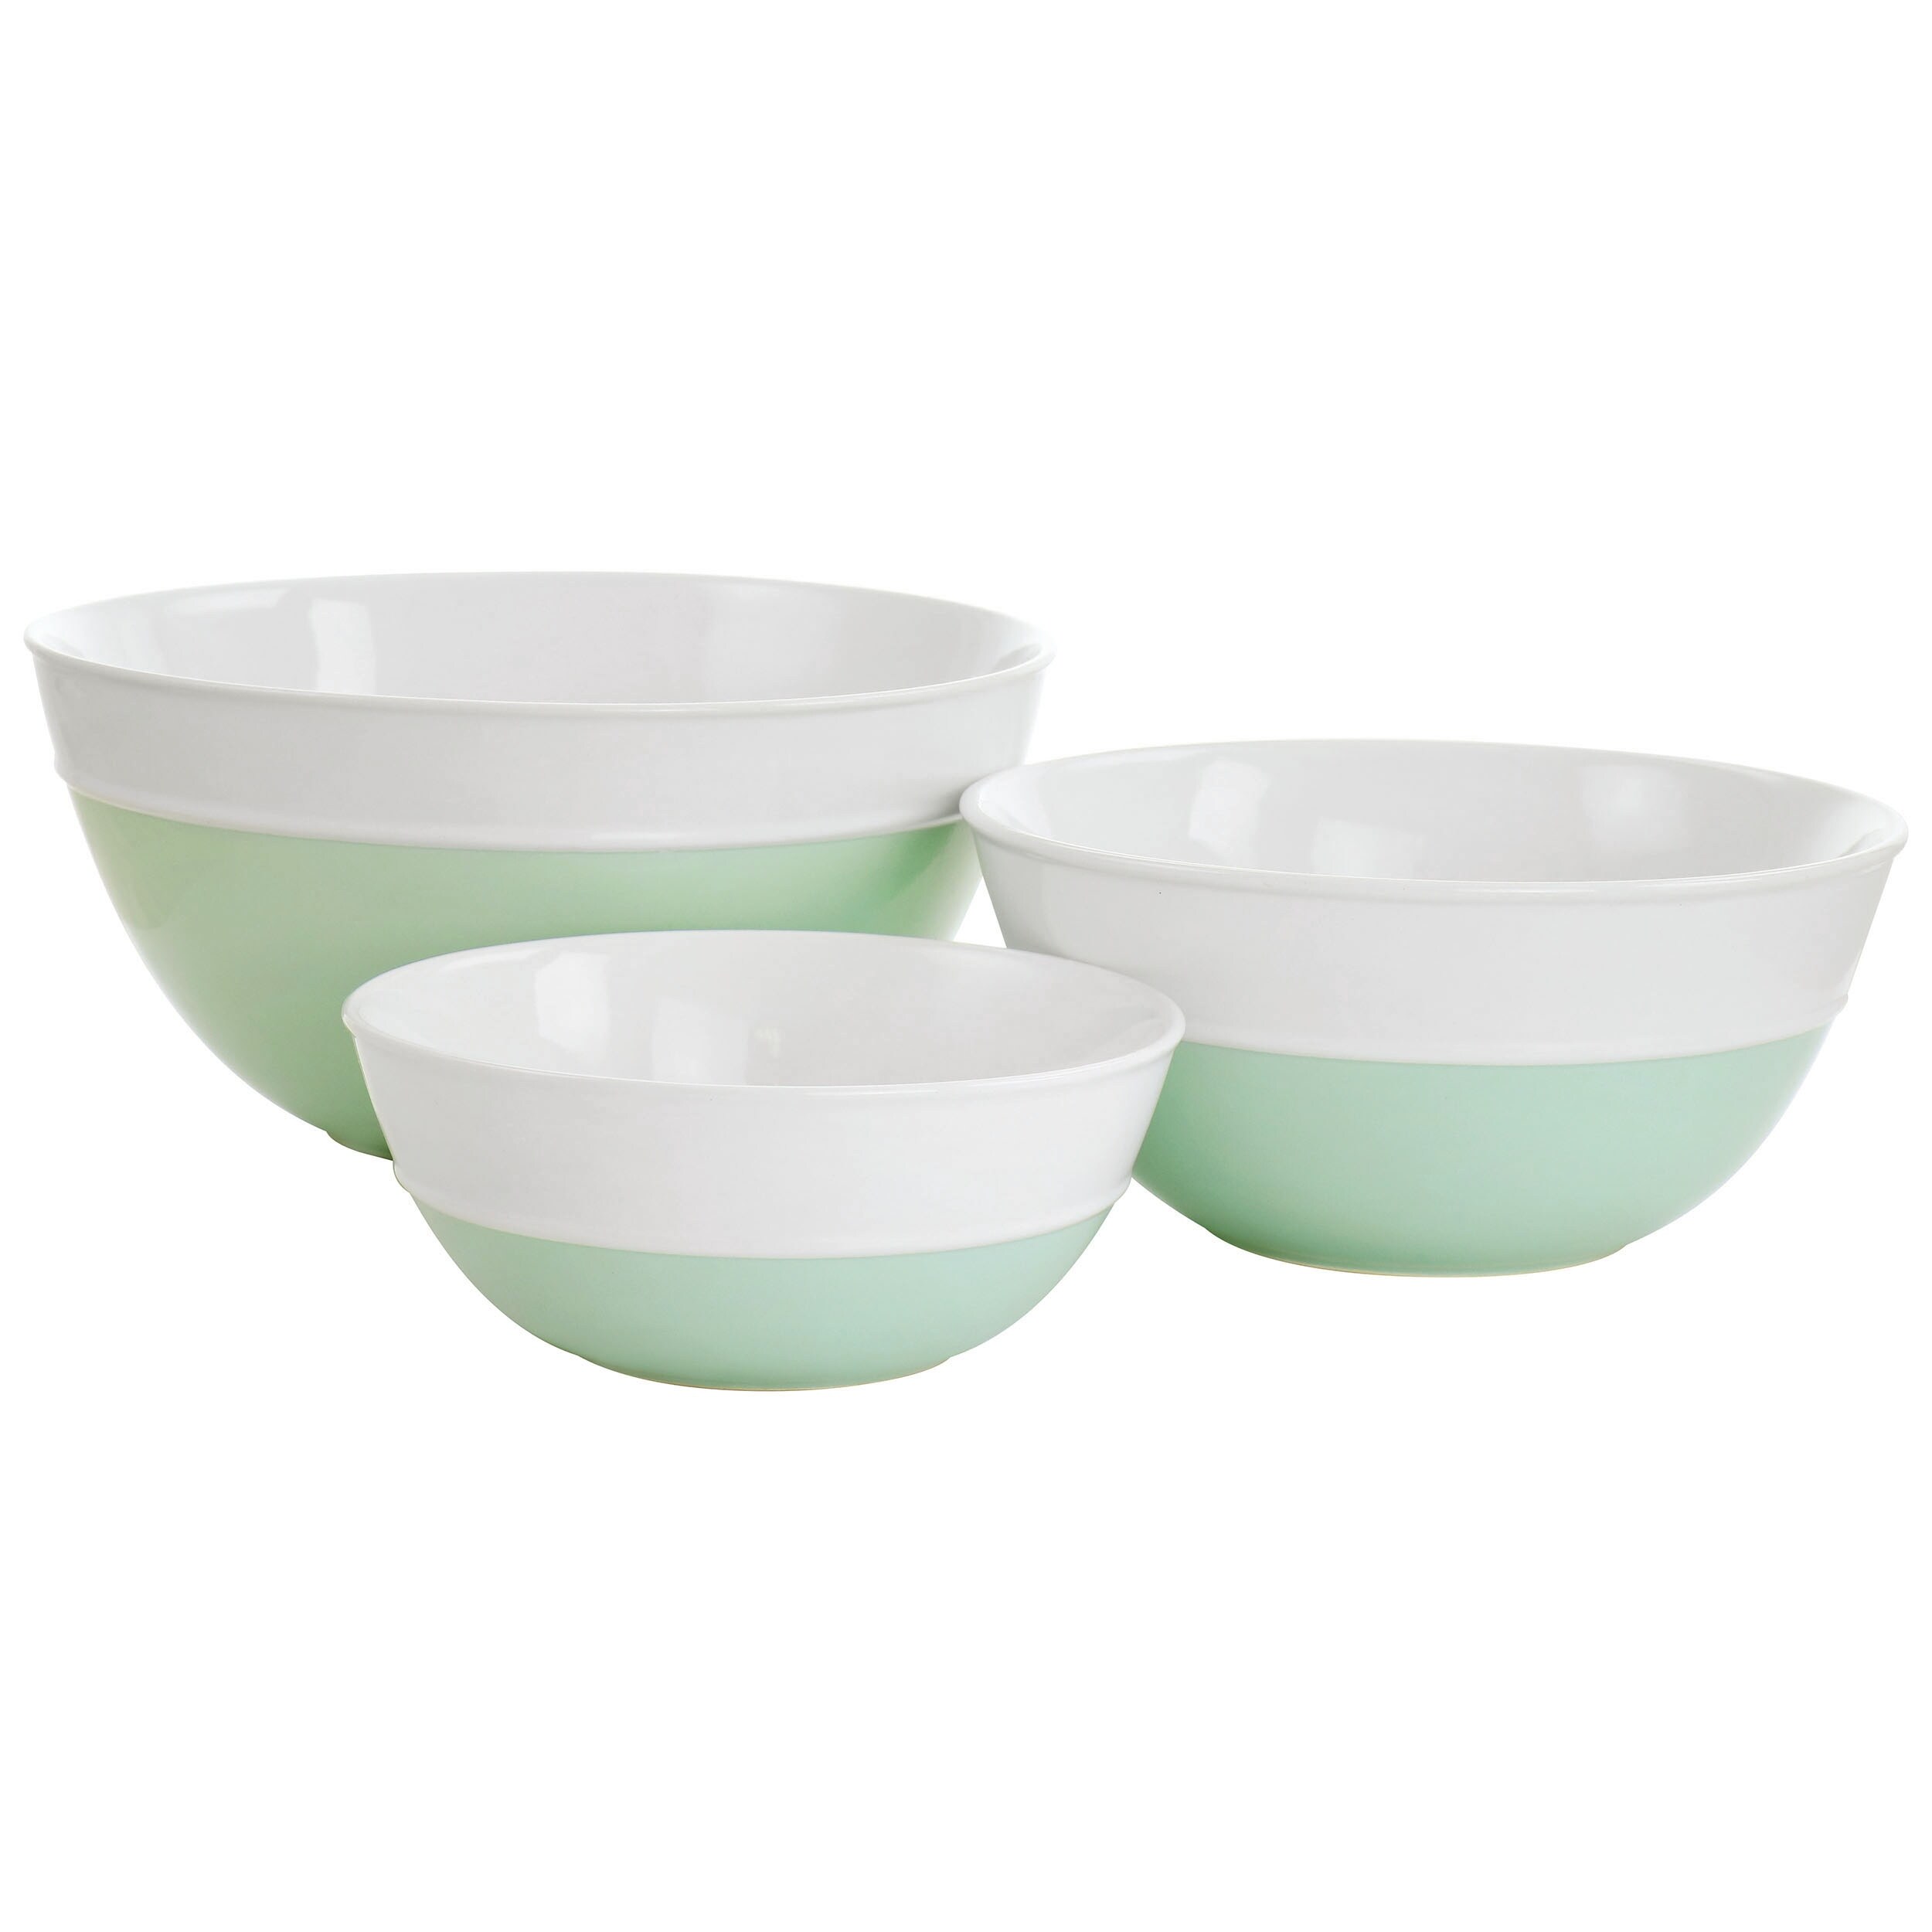 https://ak1.ostkcdn.com/images/products/is/images/direct/5b6810812acb3c2ed67f3be1e0cd2341d8ecebf7/Martha-Stewart-3-Piece-Stoneware-Duo-Tone-Bowl-Set-in-Mint-and-White.jpg